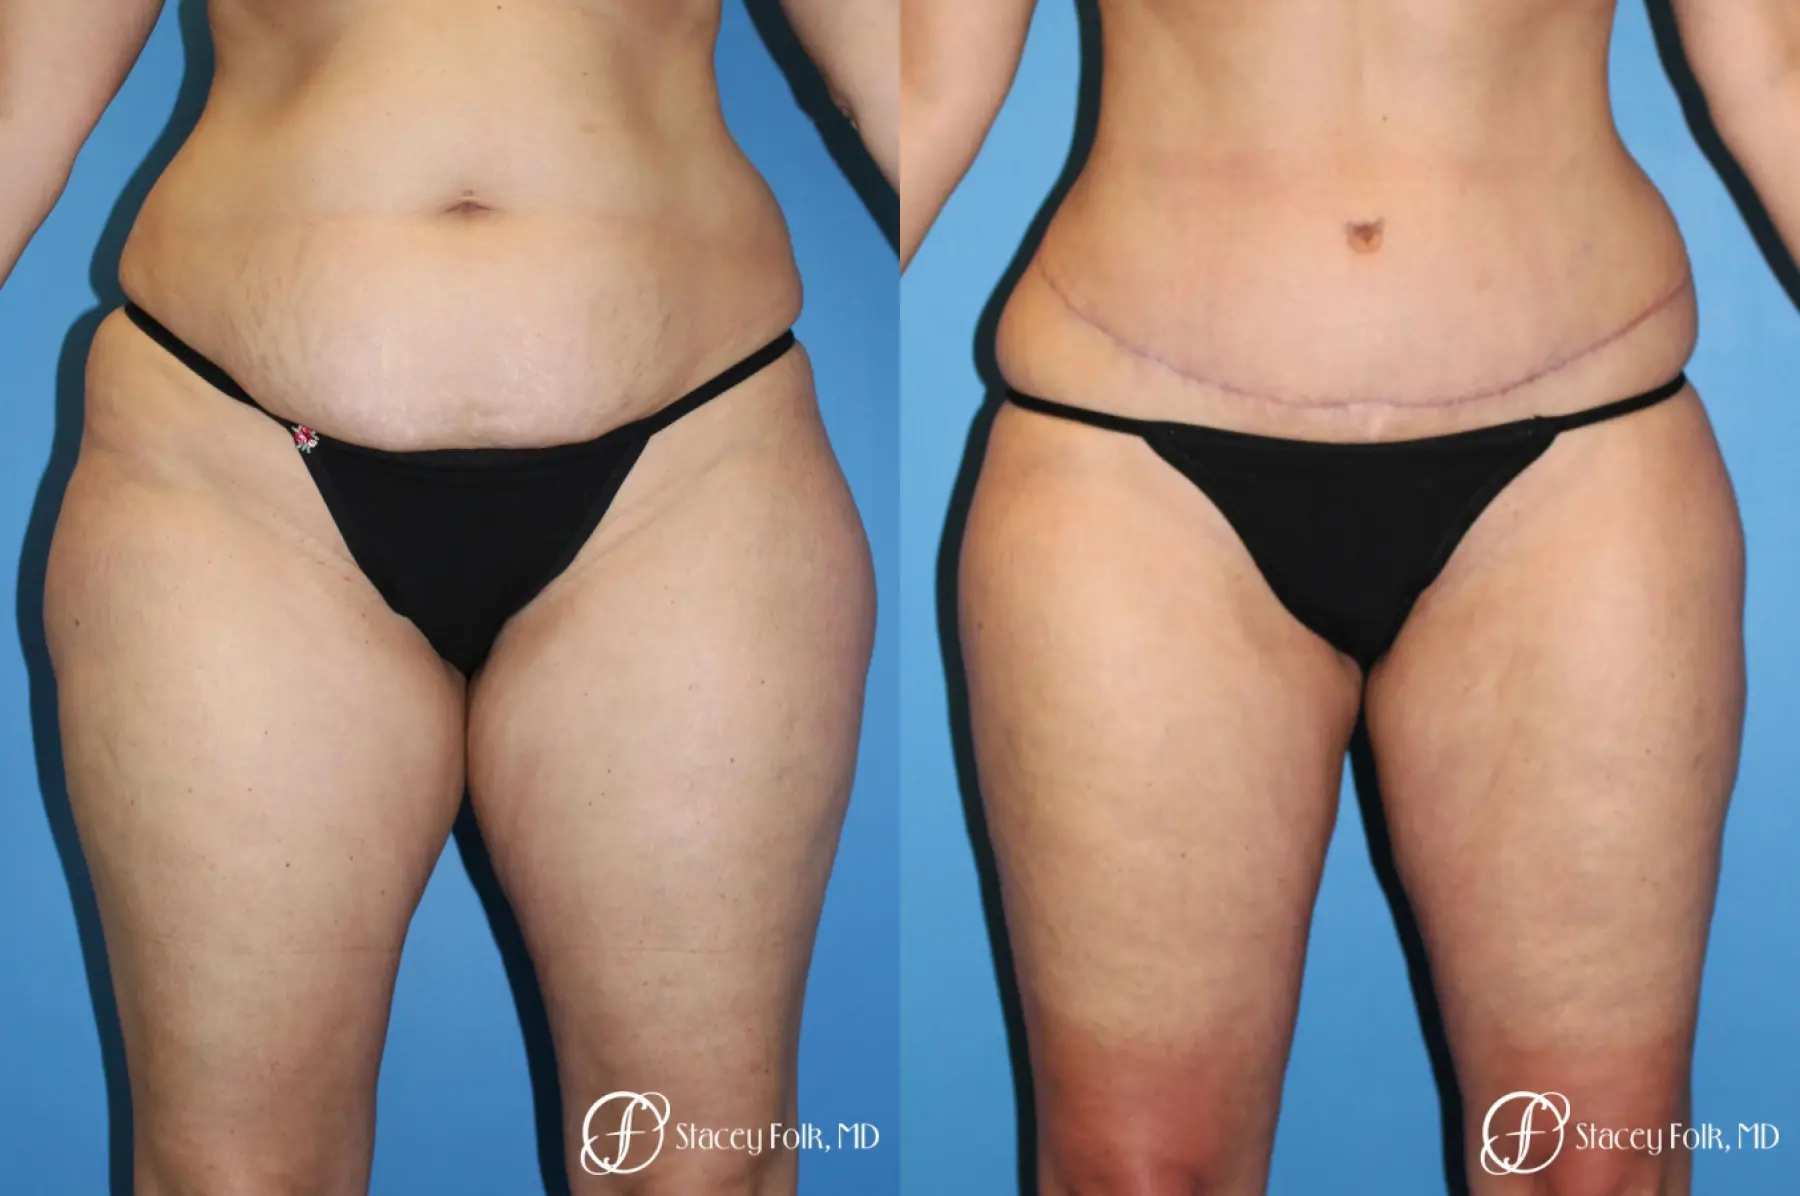 Tummy Tuck - Abdominoplasty - Before and After 1